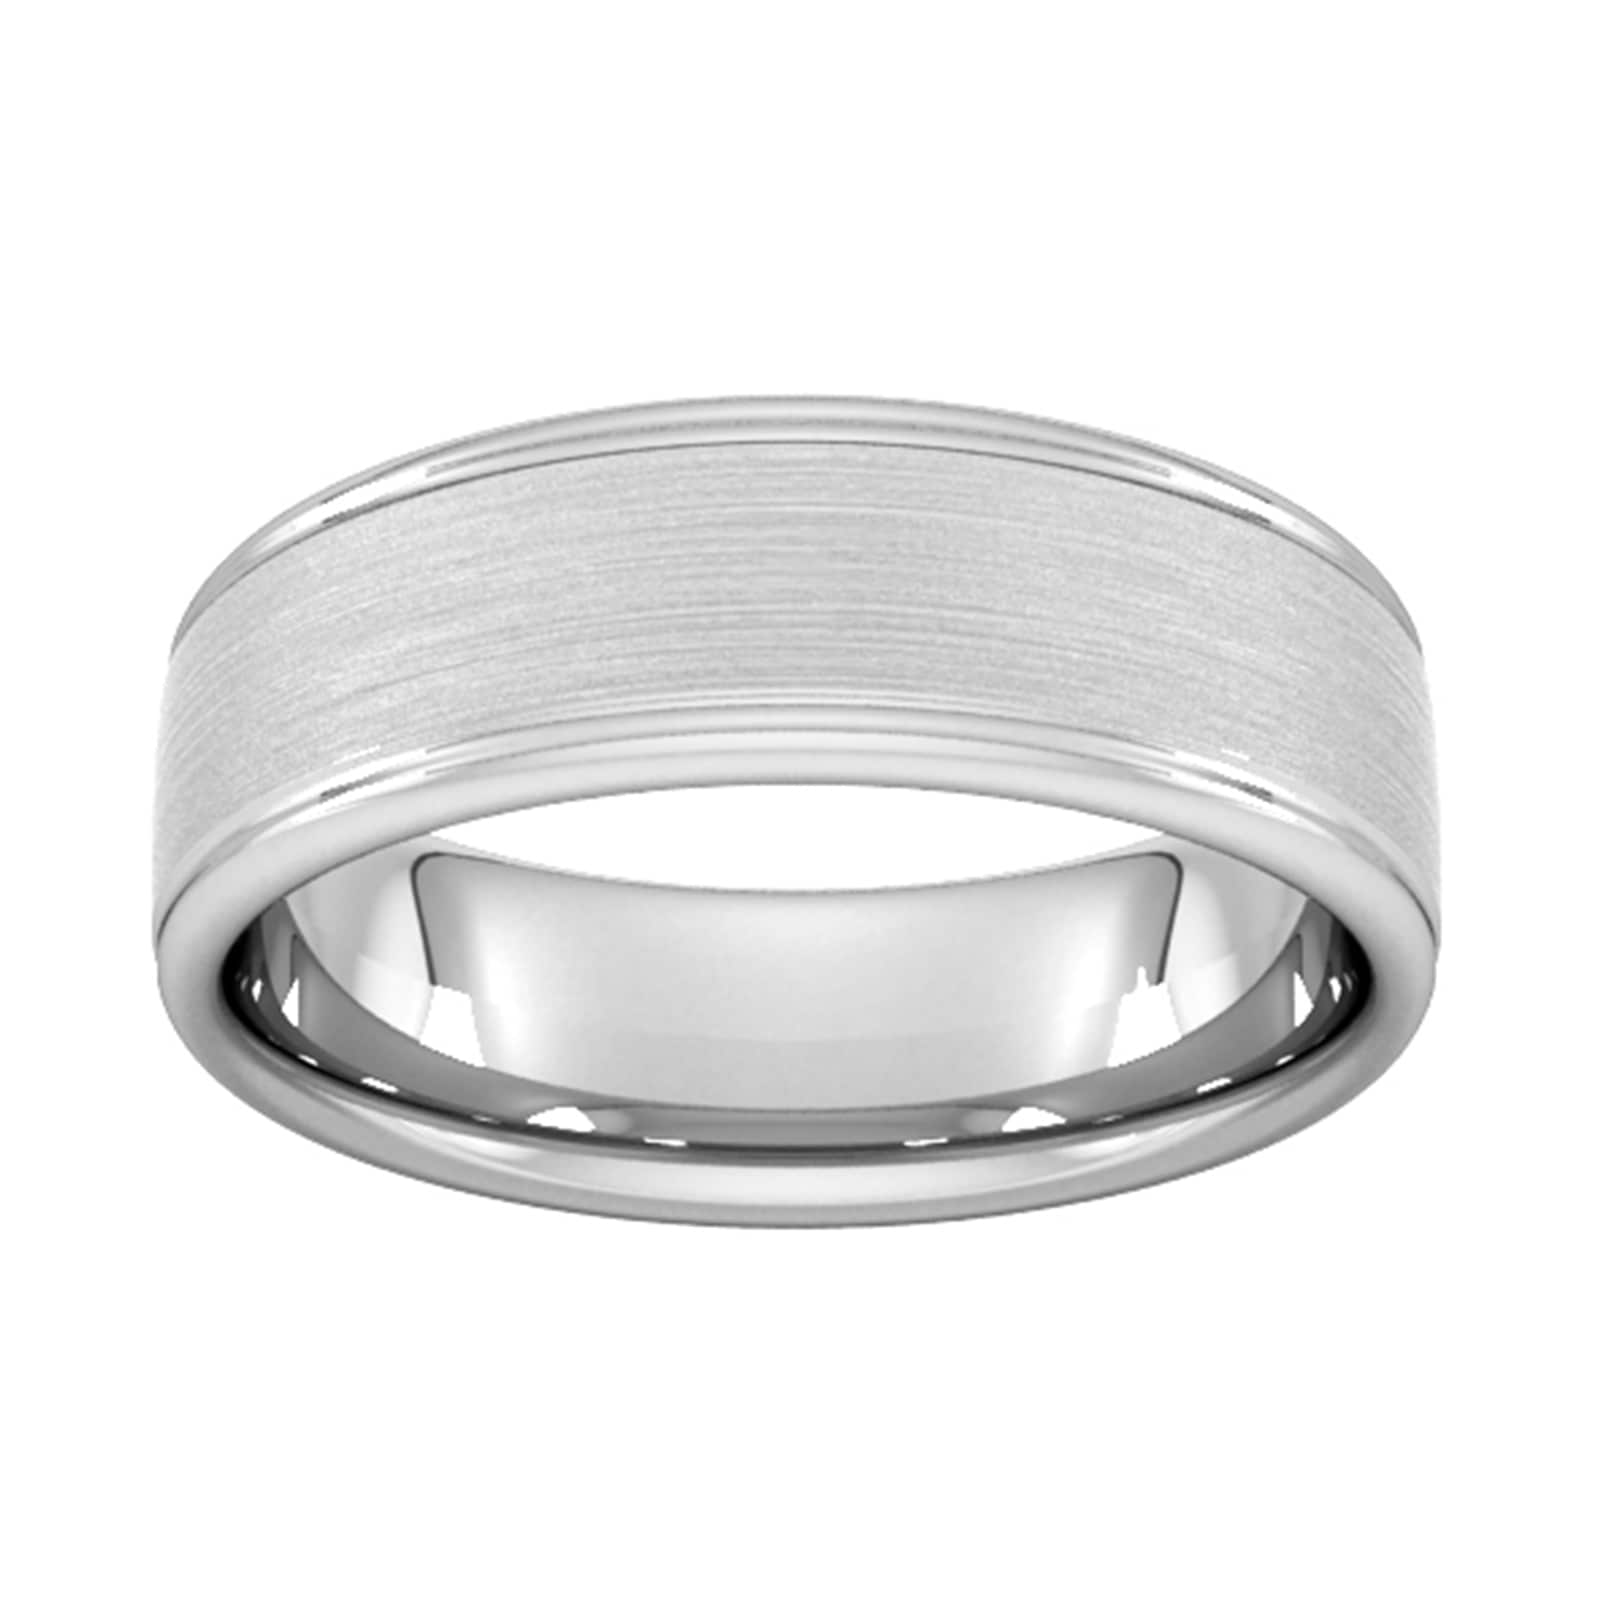 7mm Slight Court Heavy Matt Centre With Grooves Wedding Ring In 9 Carat White Gold - Ring Size X